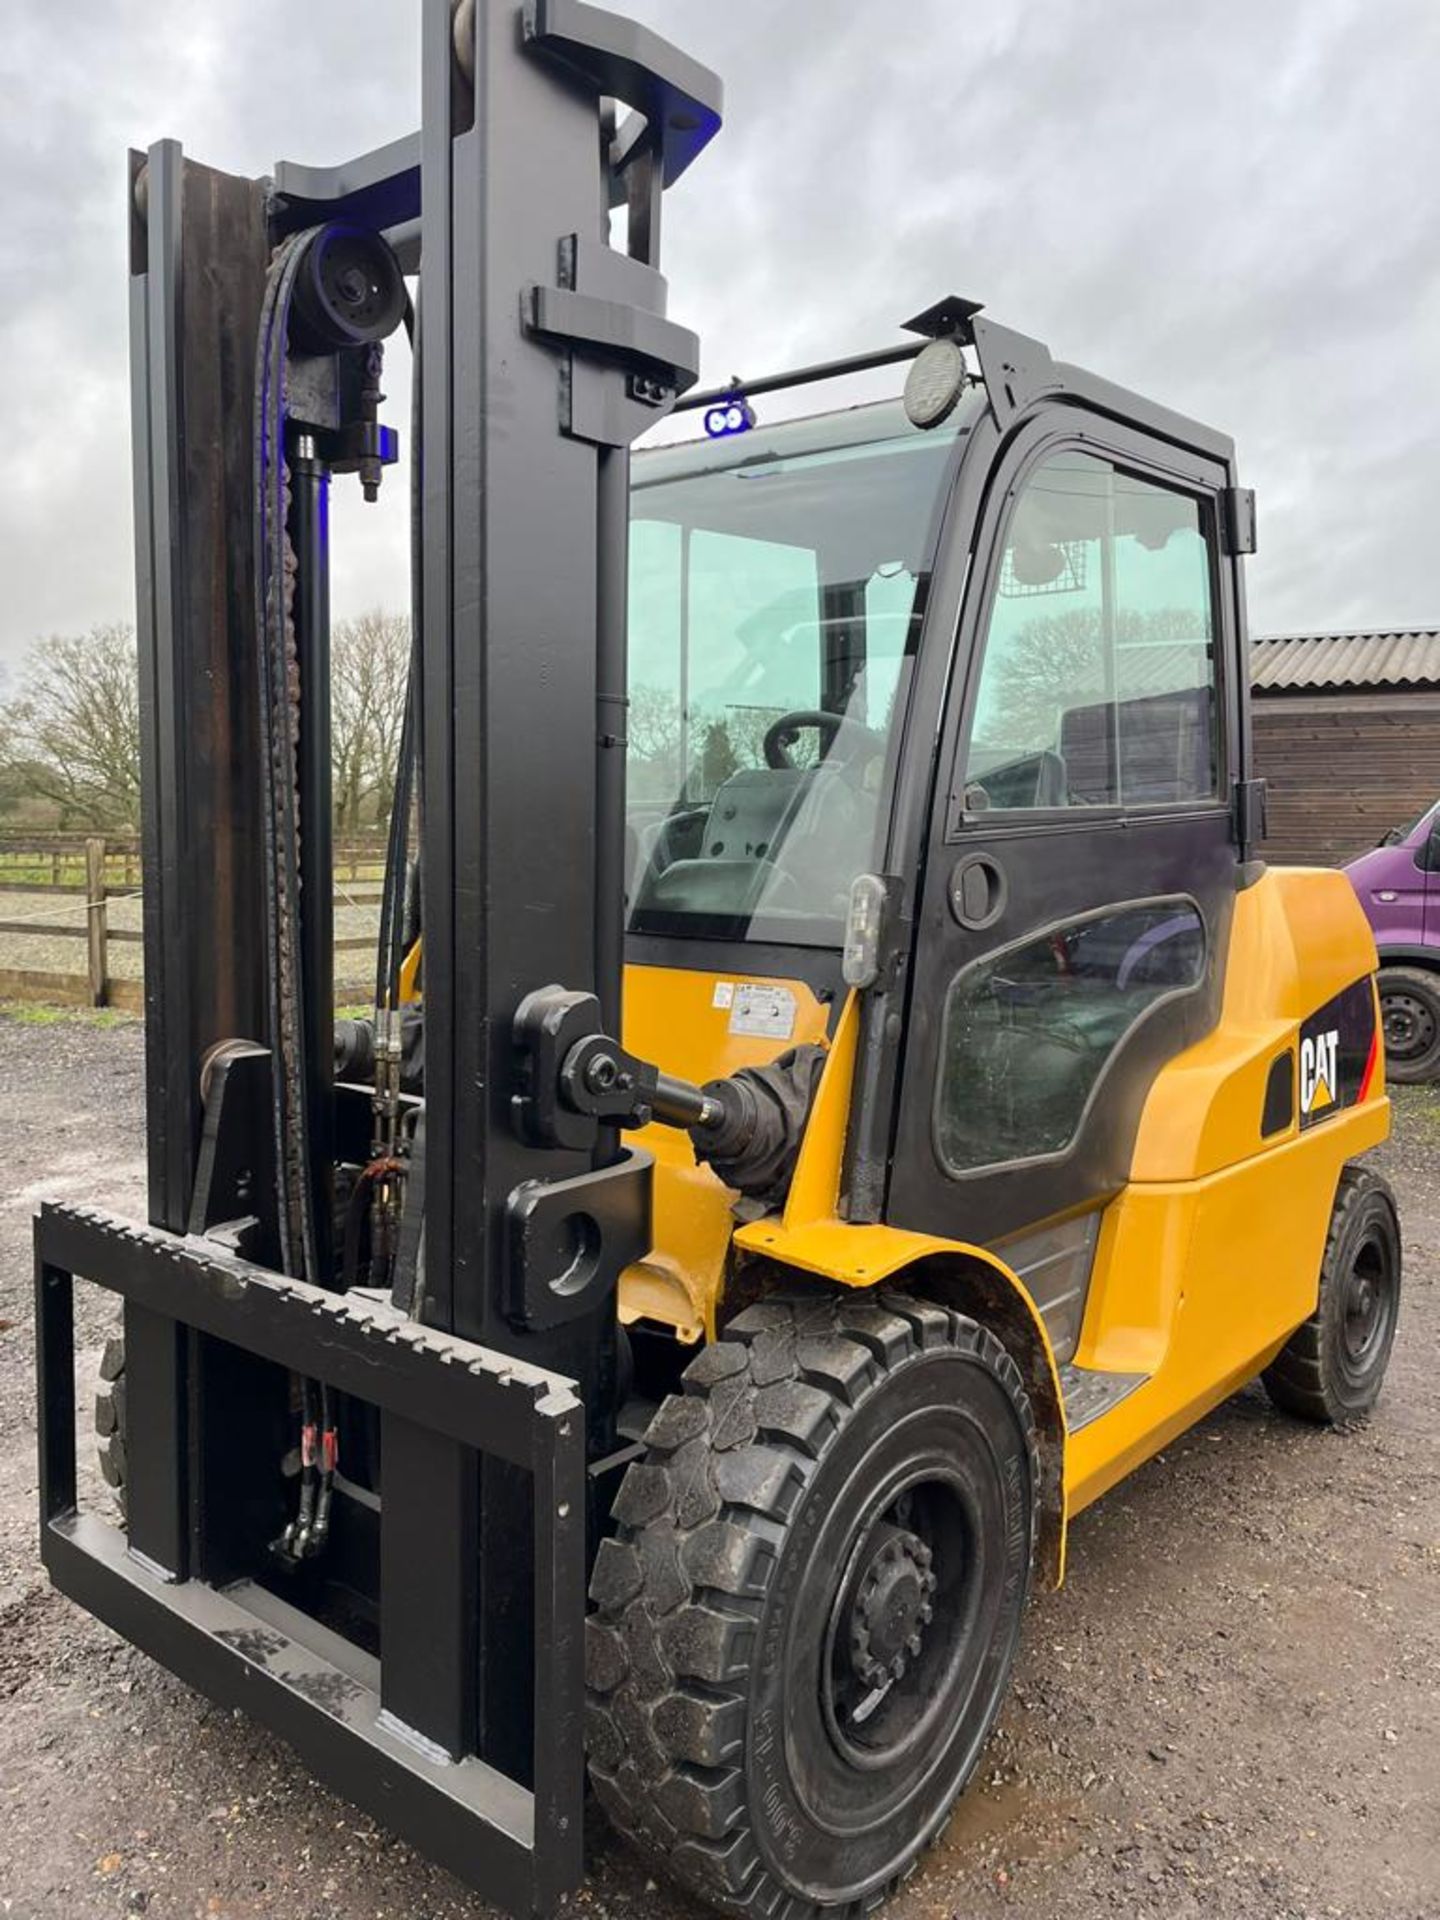 2013 - CATERPILLAR, 5 Tonne Diesel Forklift (New Front Tyres) - Image 6 of 10